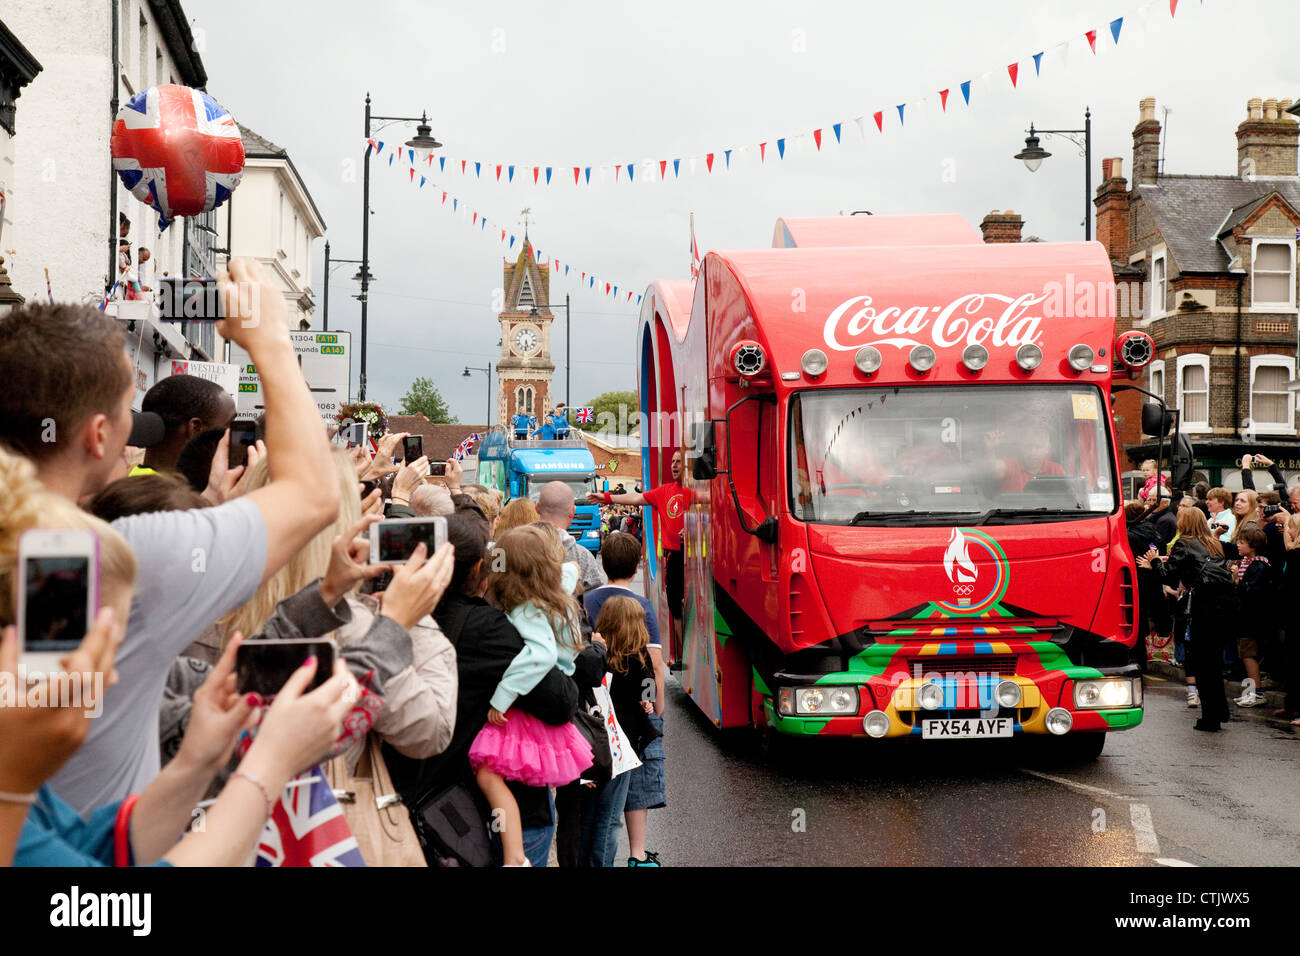 coca cola 2012 olympic sponsor lorry at the torch relay Newmarket Suffolk East Anglia UK Stock Photo